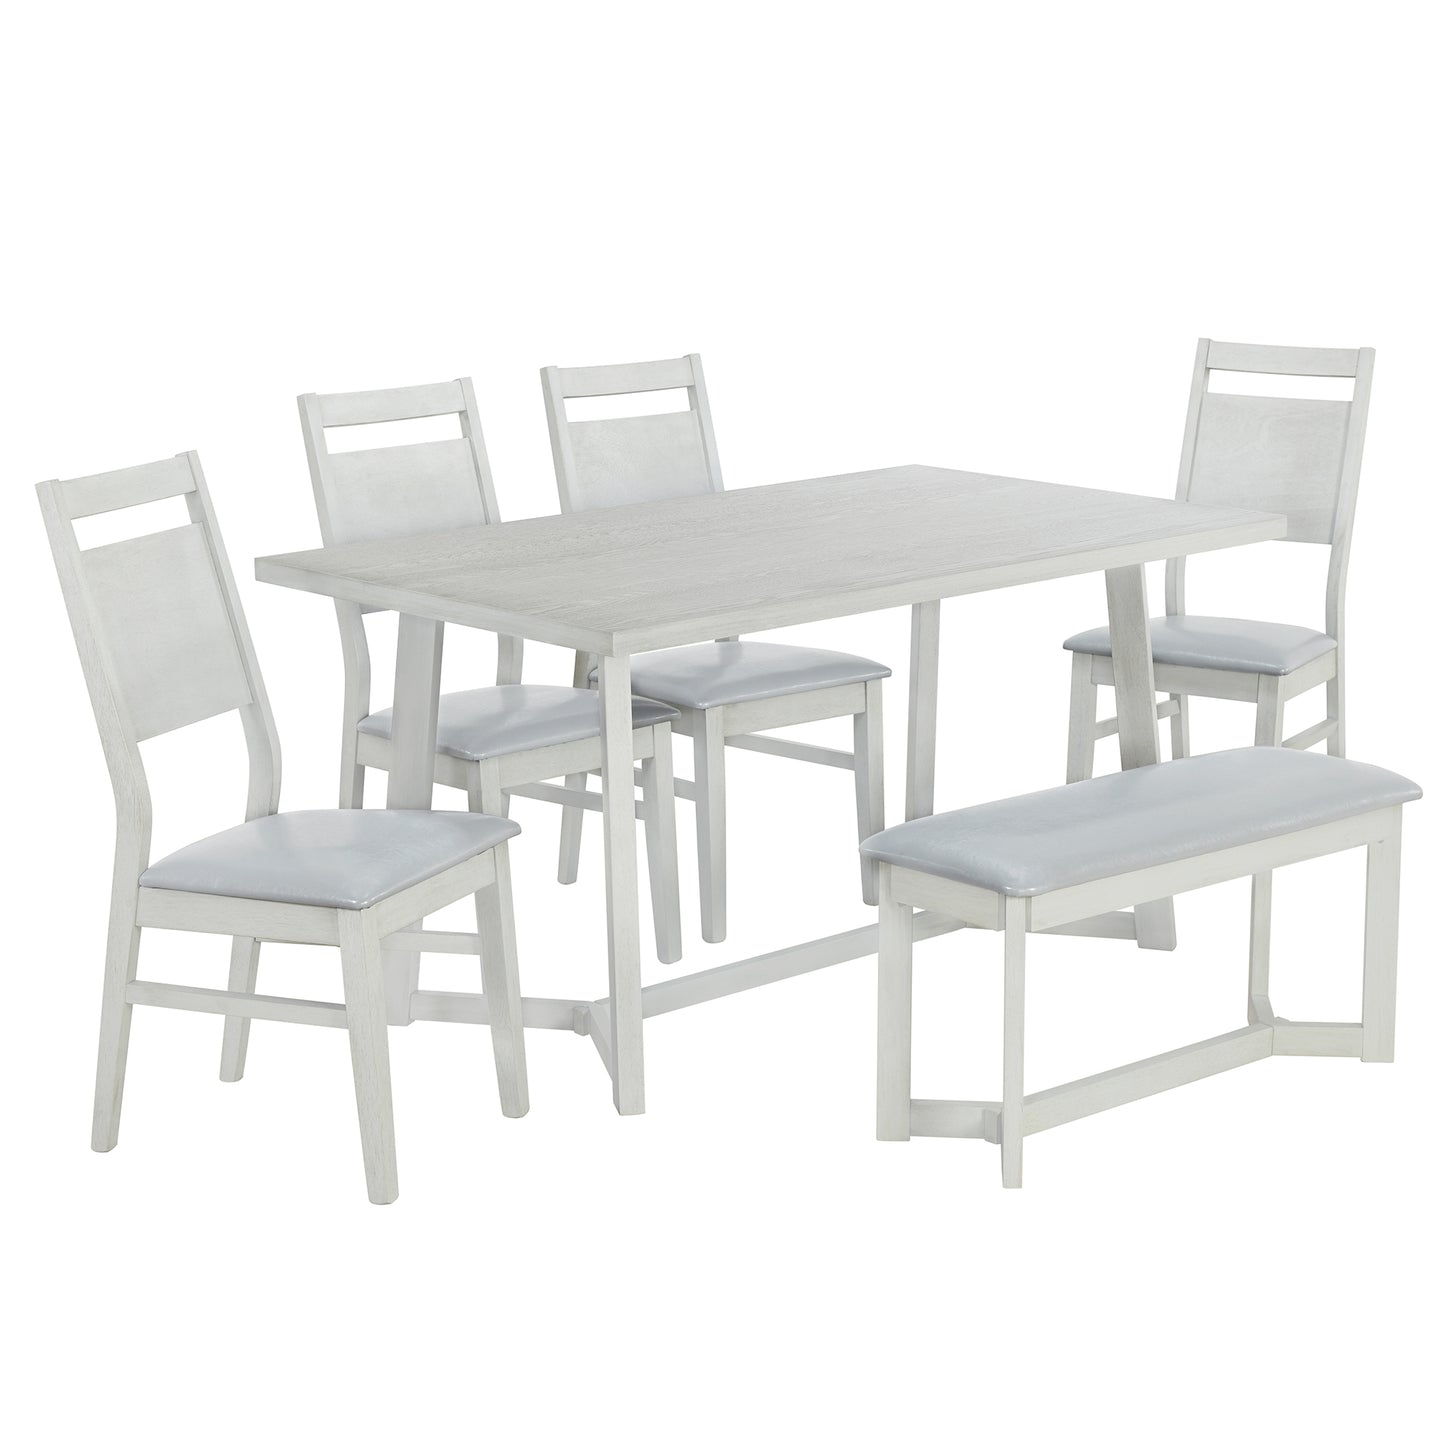 TOPMAX Farmhouse 6-Piece Wood Dining Table Set with 4 Upholstered Chairs and Bench, Gray